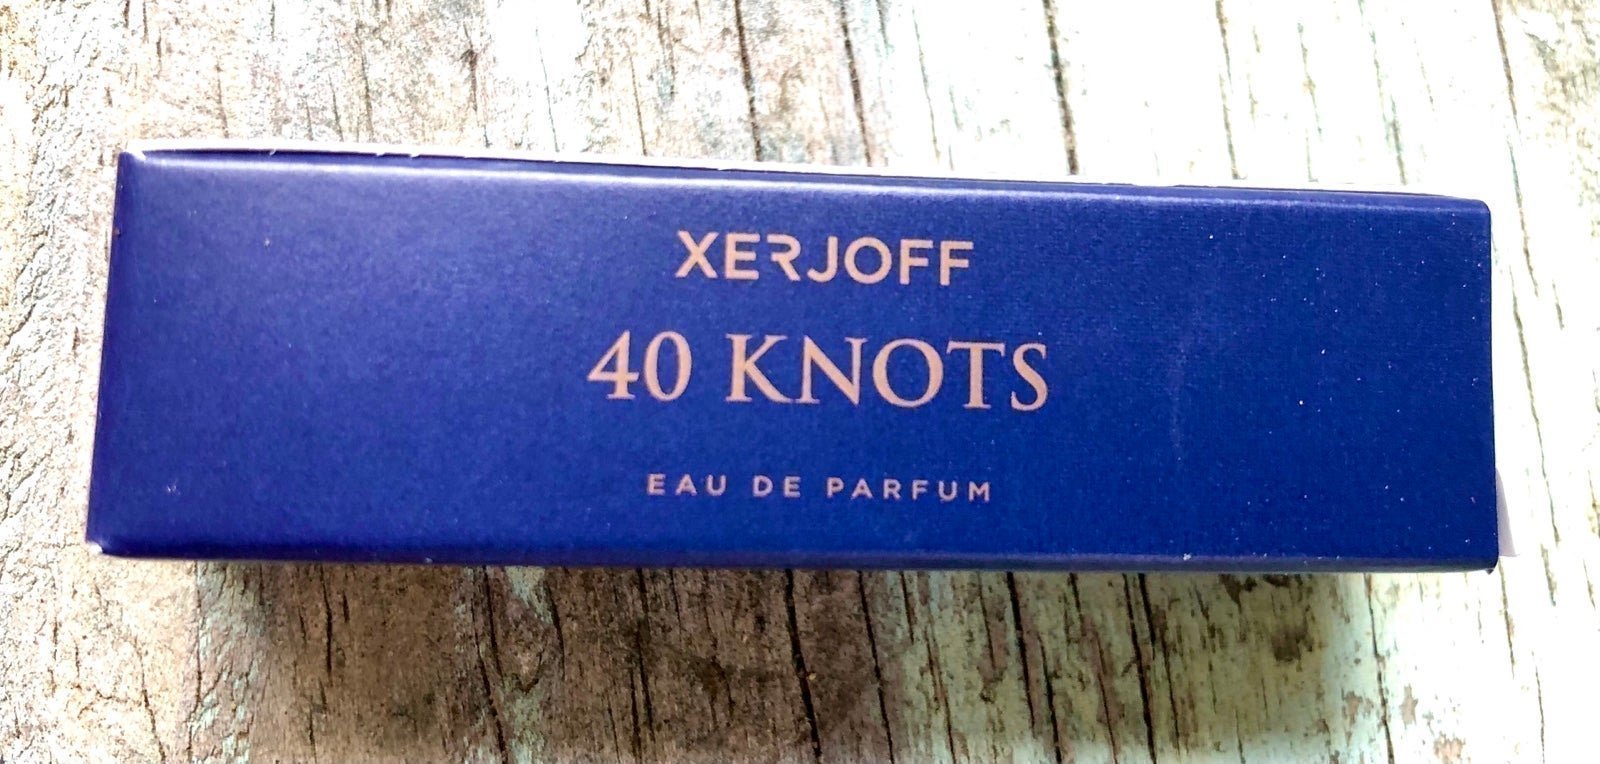 40 Knots by Xerjoff Join The Club Collection 2ml Vial Spray/ New! Sealed! 68PNAvmm4